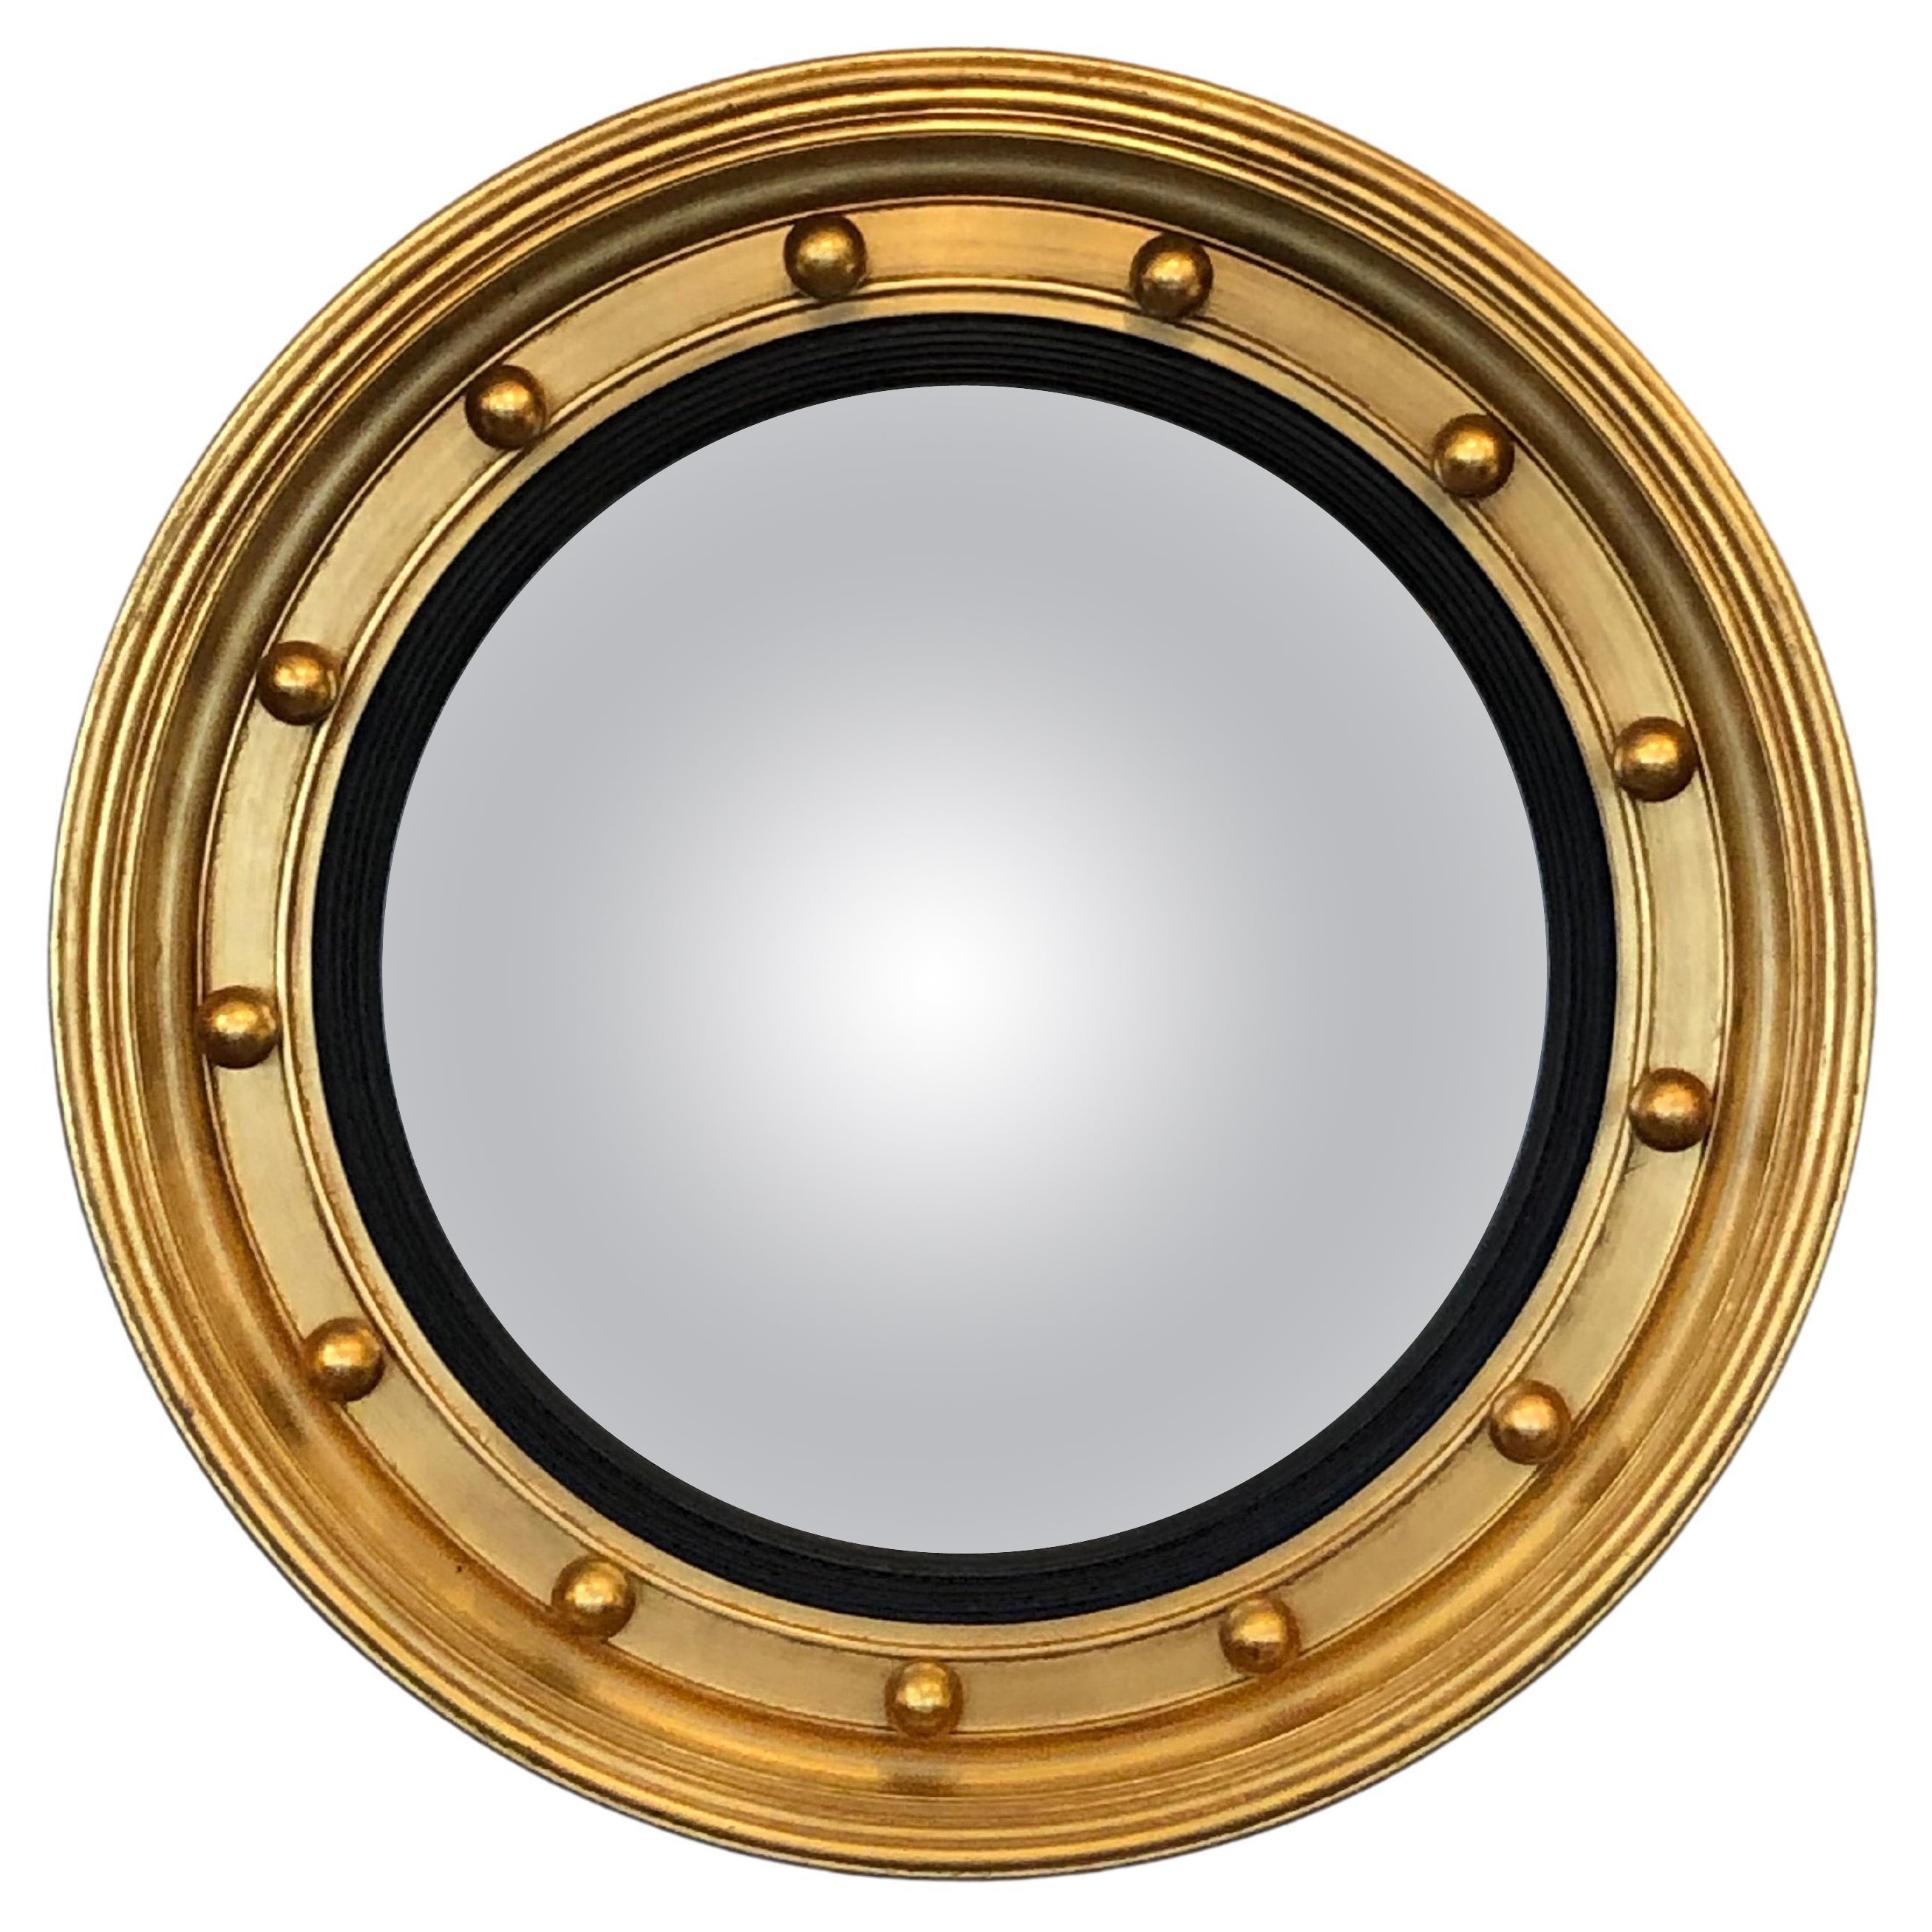 What is an example of a convex mirror?